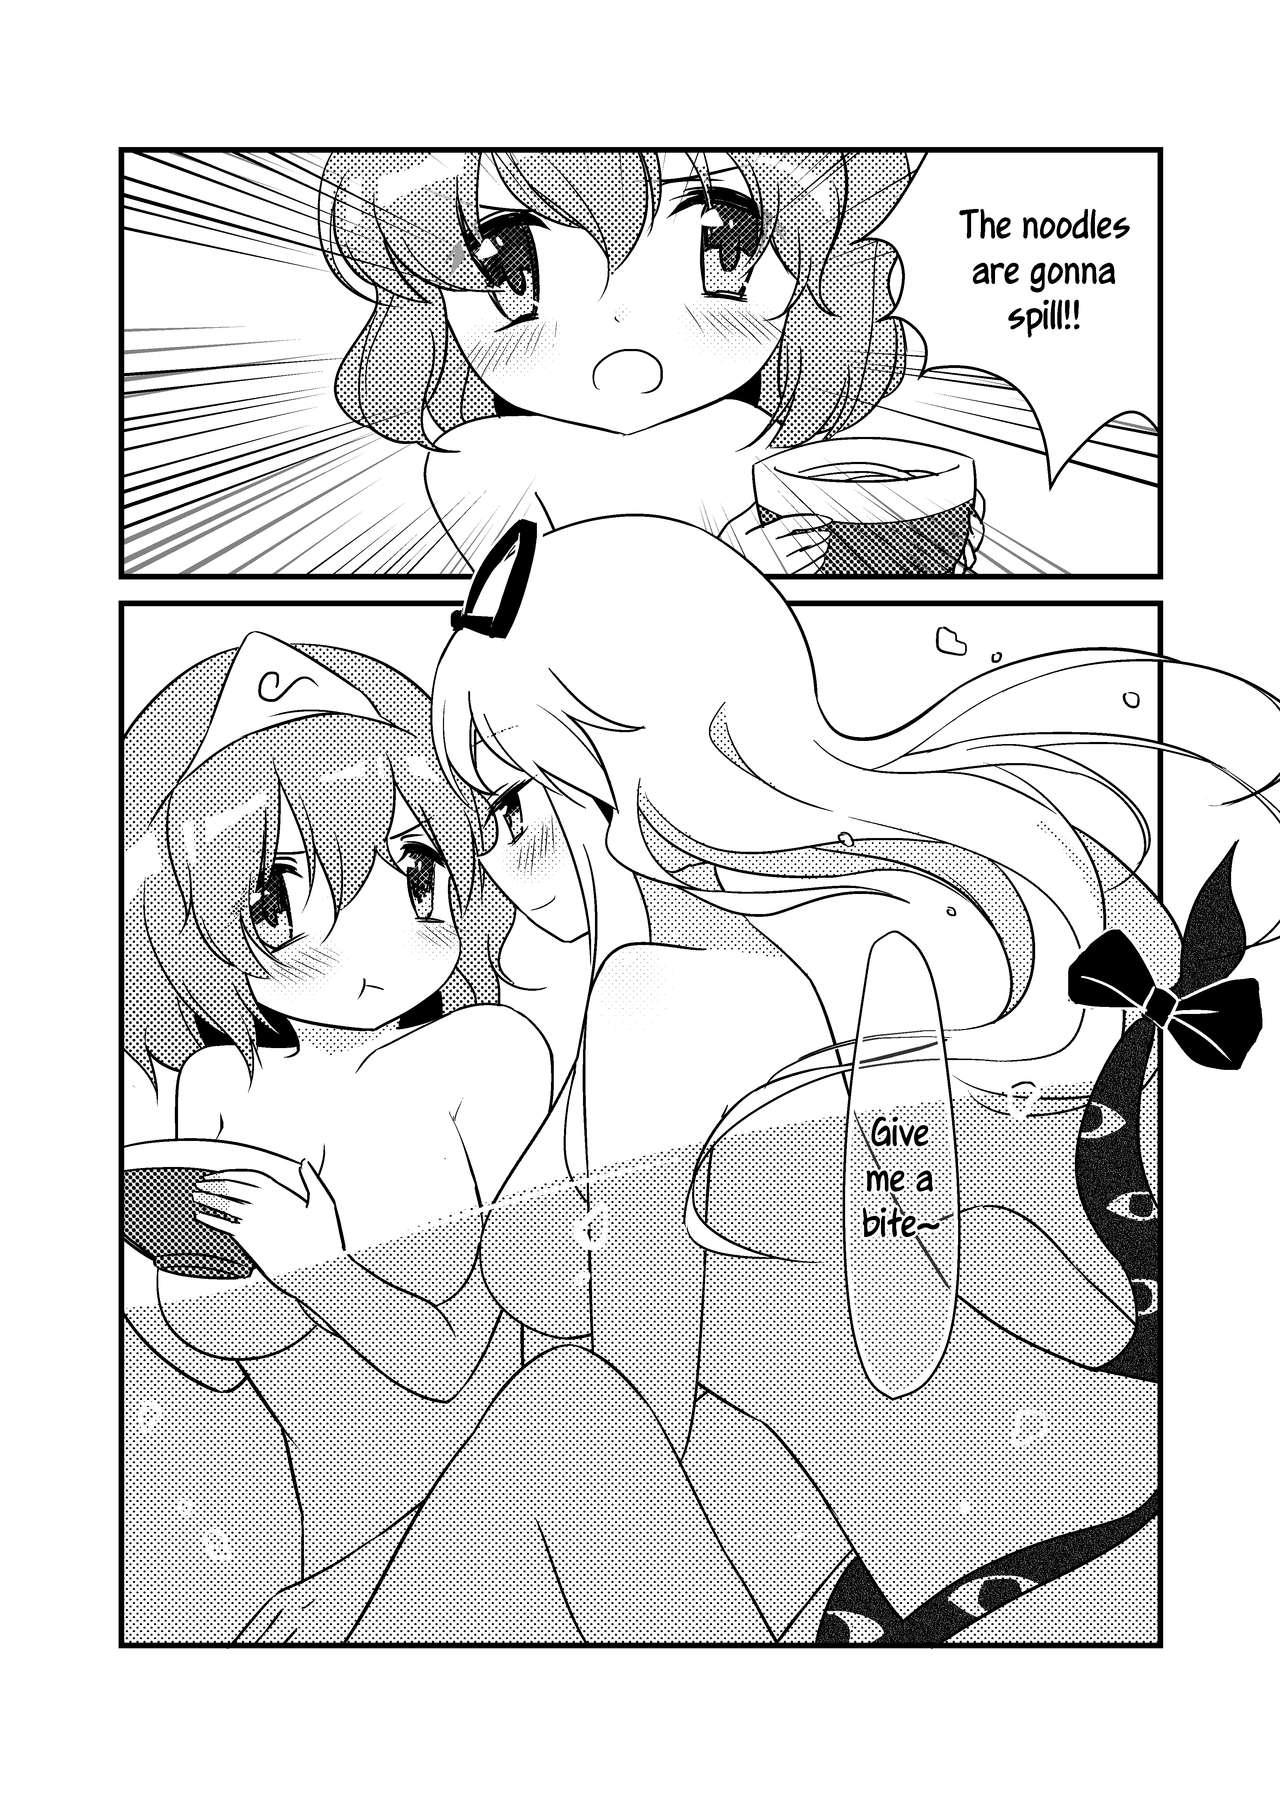 Double ????一起泡温泉吧！ | ????Let's Soak in the Hot Spring! - Touhou project Baile - Page 6